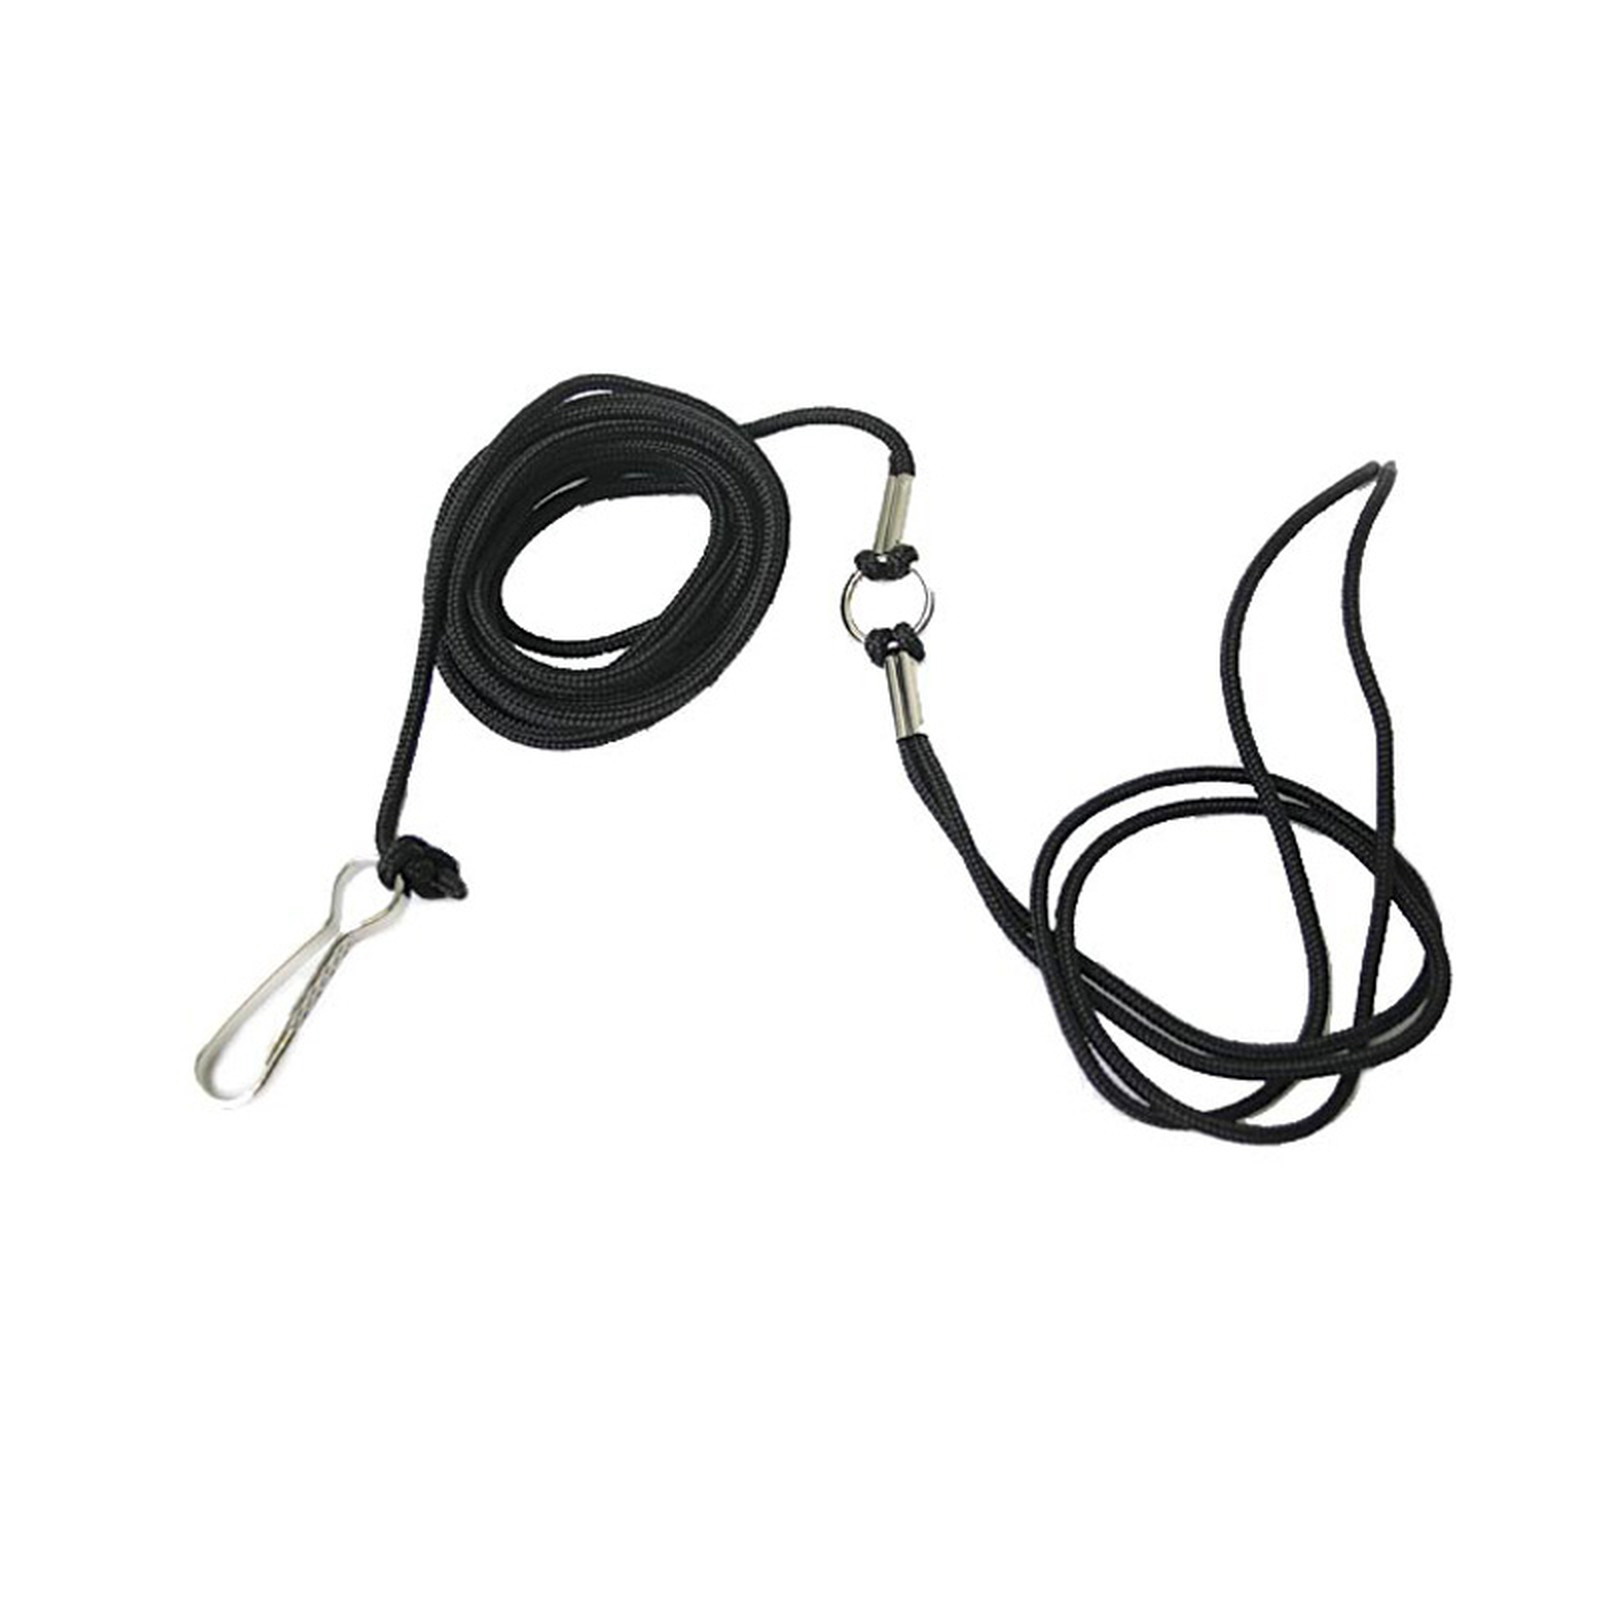 Finntack Pro Rope for ear cover